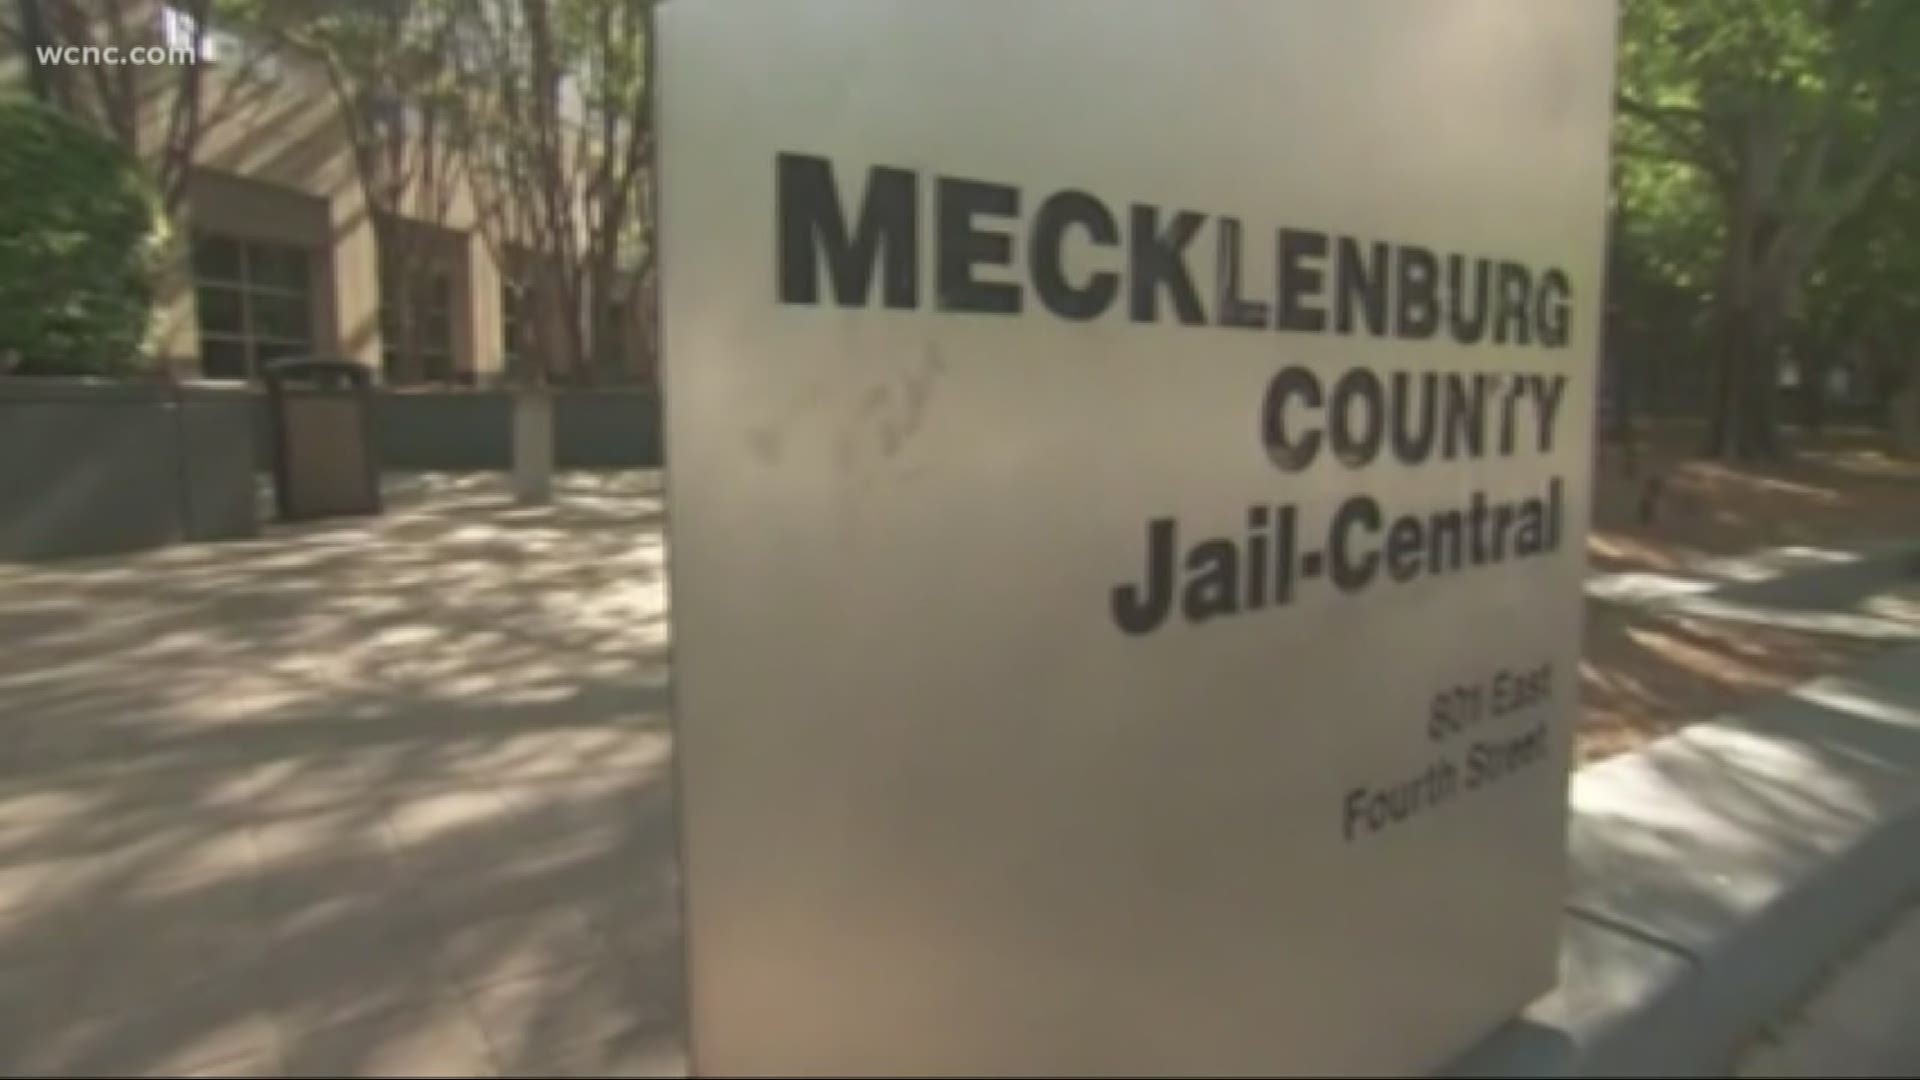 At a news conference Monday, Mecklenburg County Sheriff McFadden said it's time stop pointing fingers.